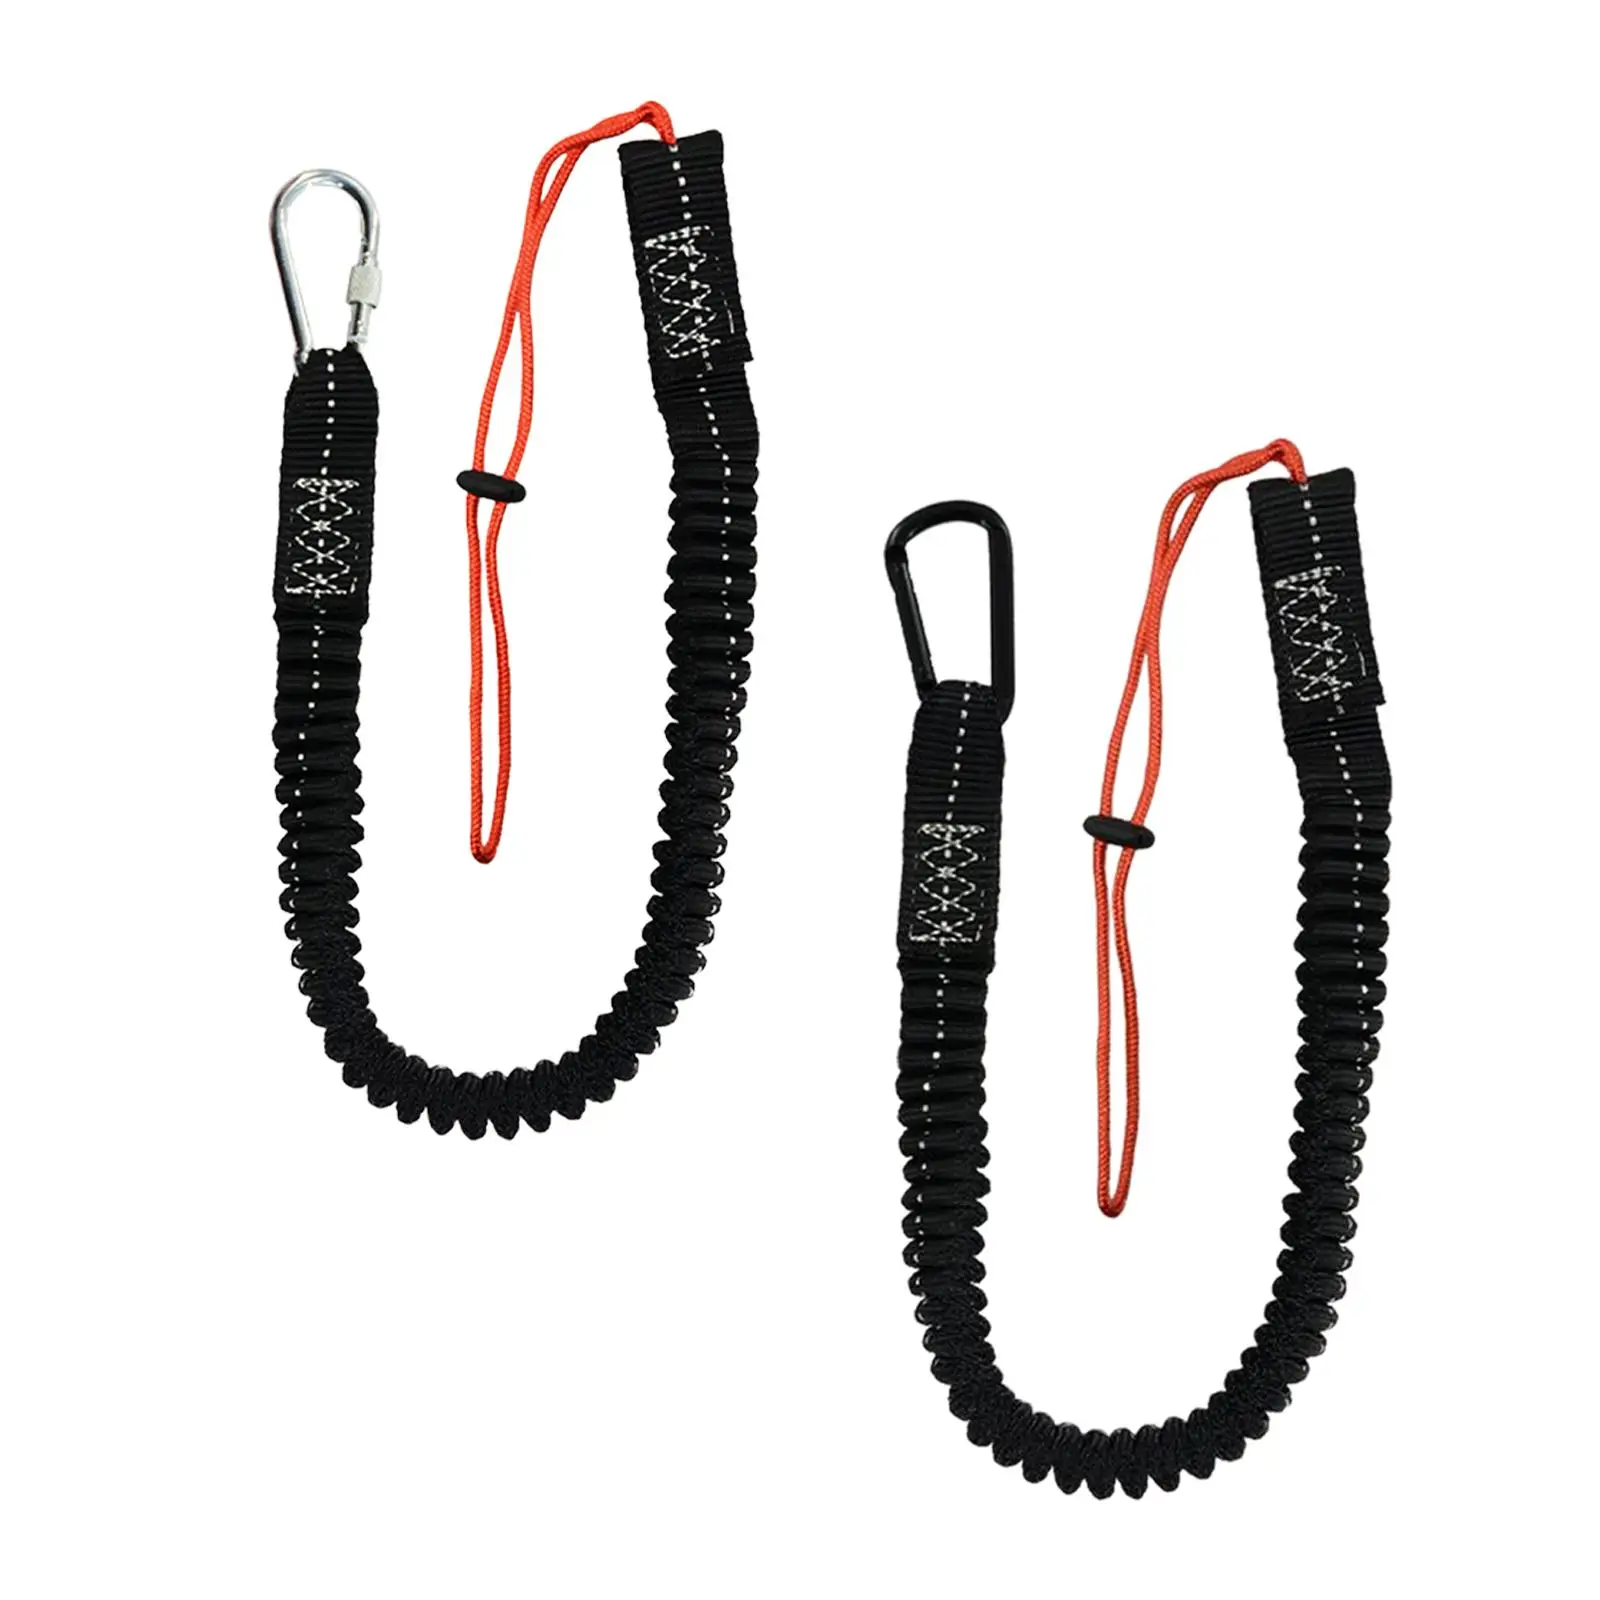 Tool Lanyard Clip Bungee Cord Retractable Shock Cord Stopper for Mountaineering Camping